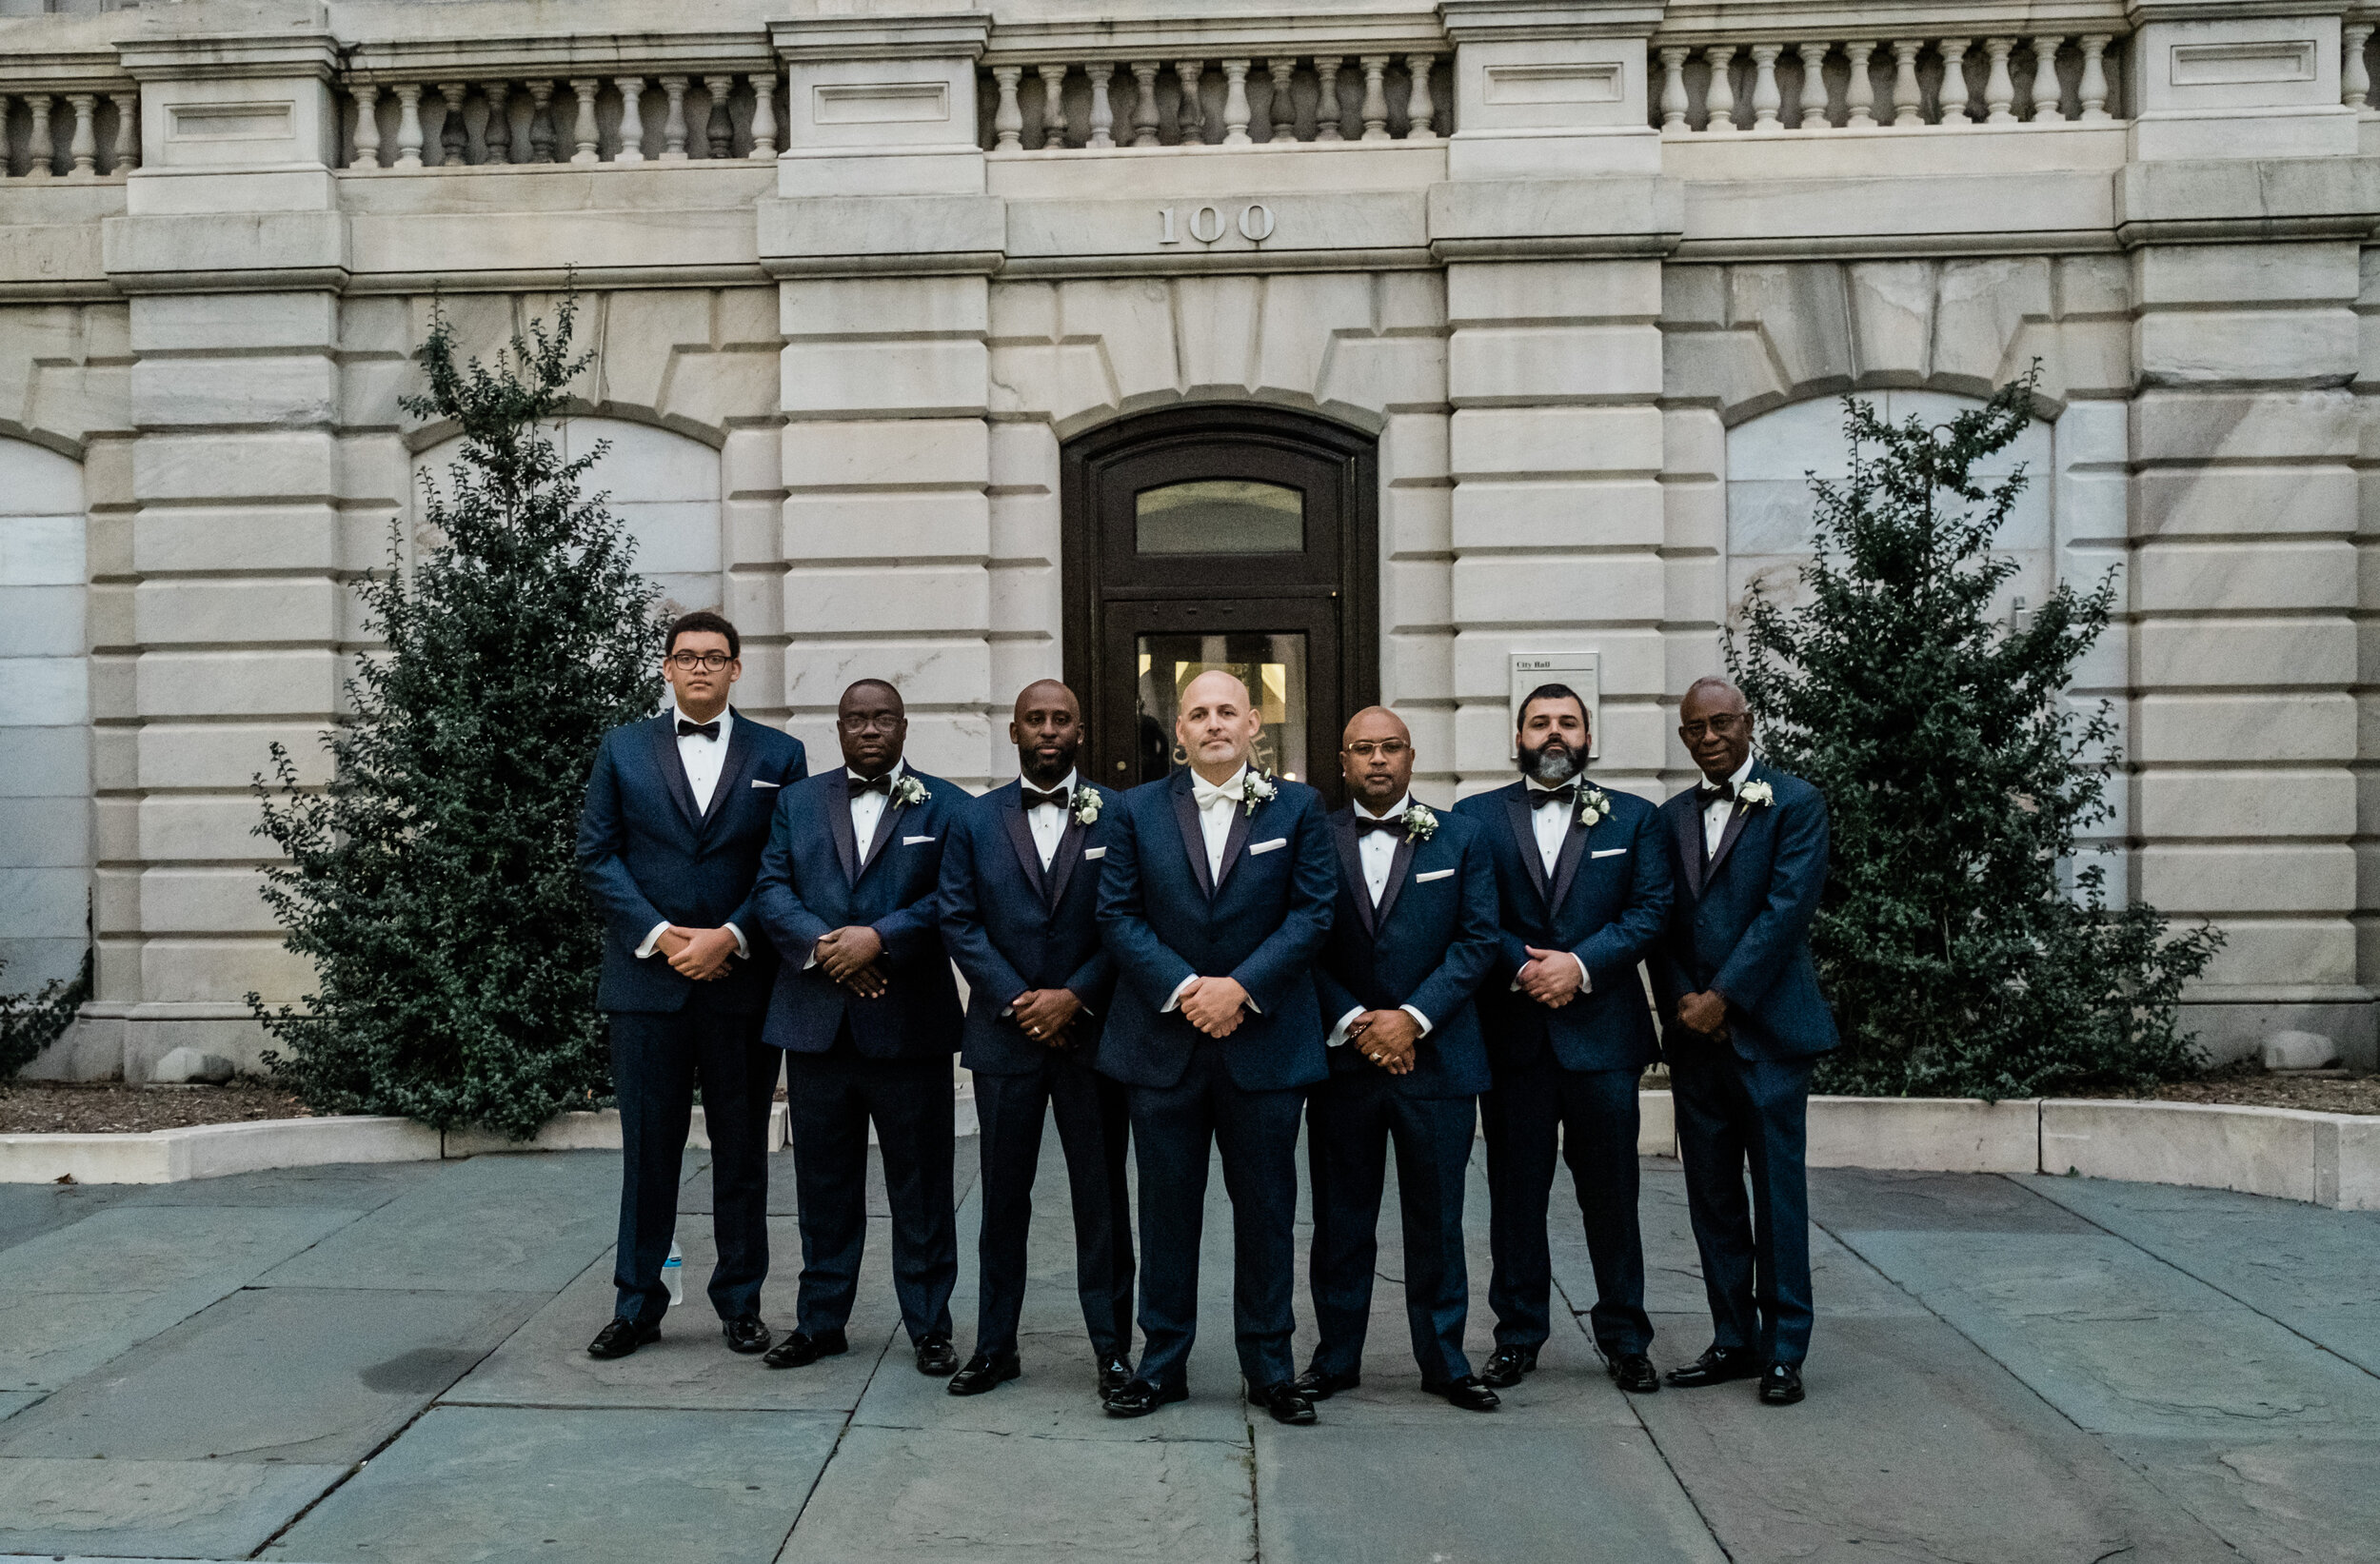 get married in baltimore city hall shot by megapixels media biracial couple wedding photographers maryland-37.jpg